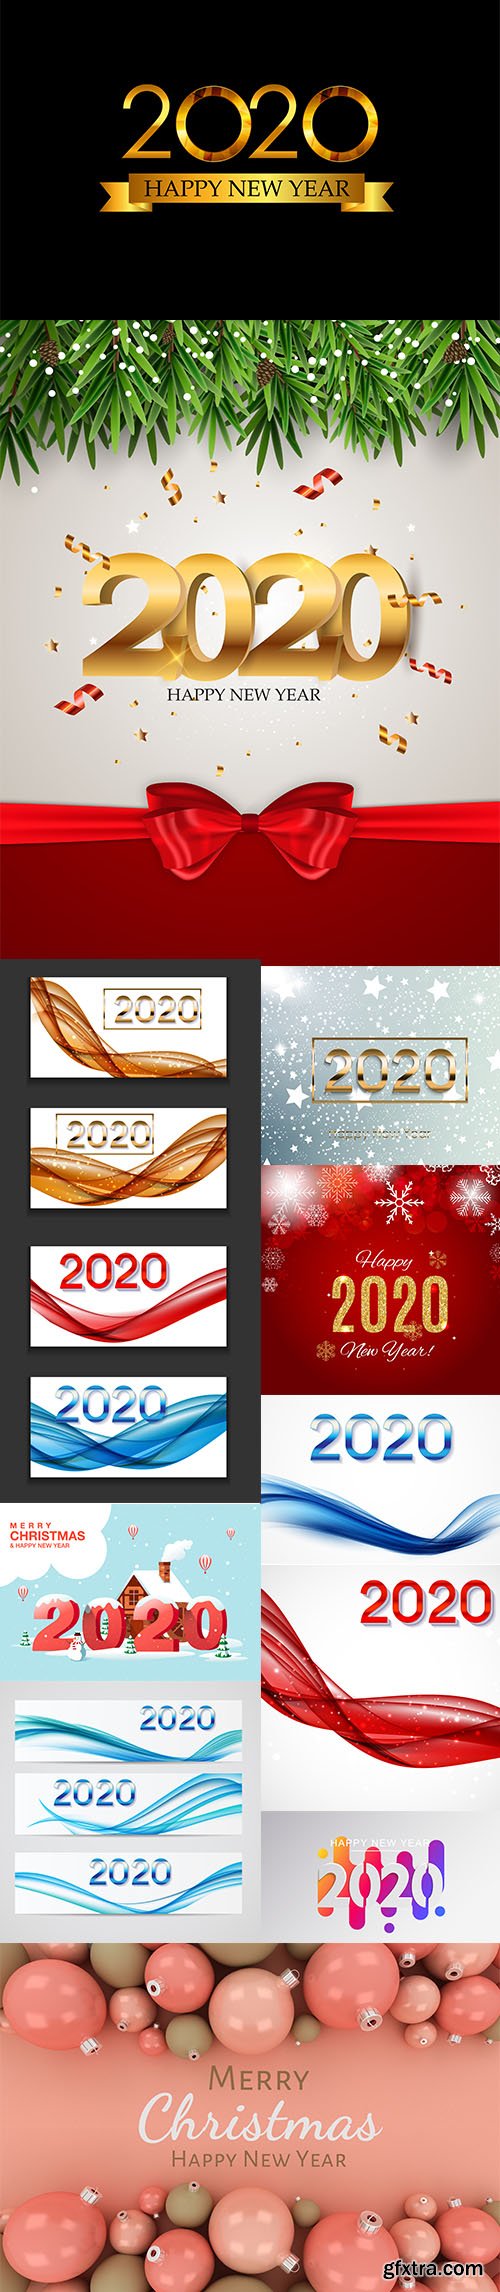 Merry Christmas and New Year 2020 Vector Illustrations Pack Vol 3